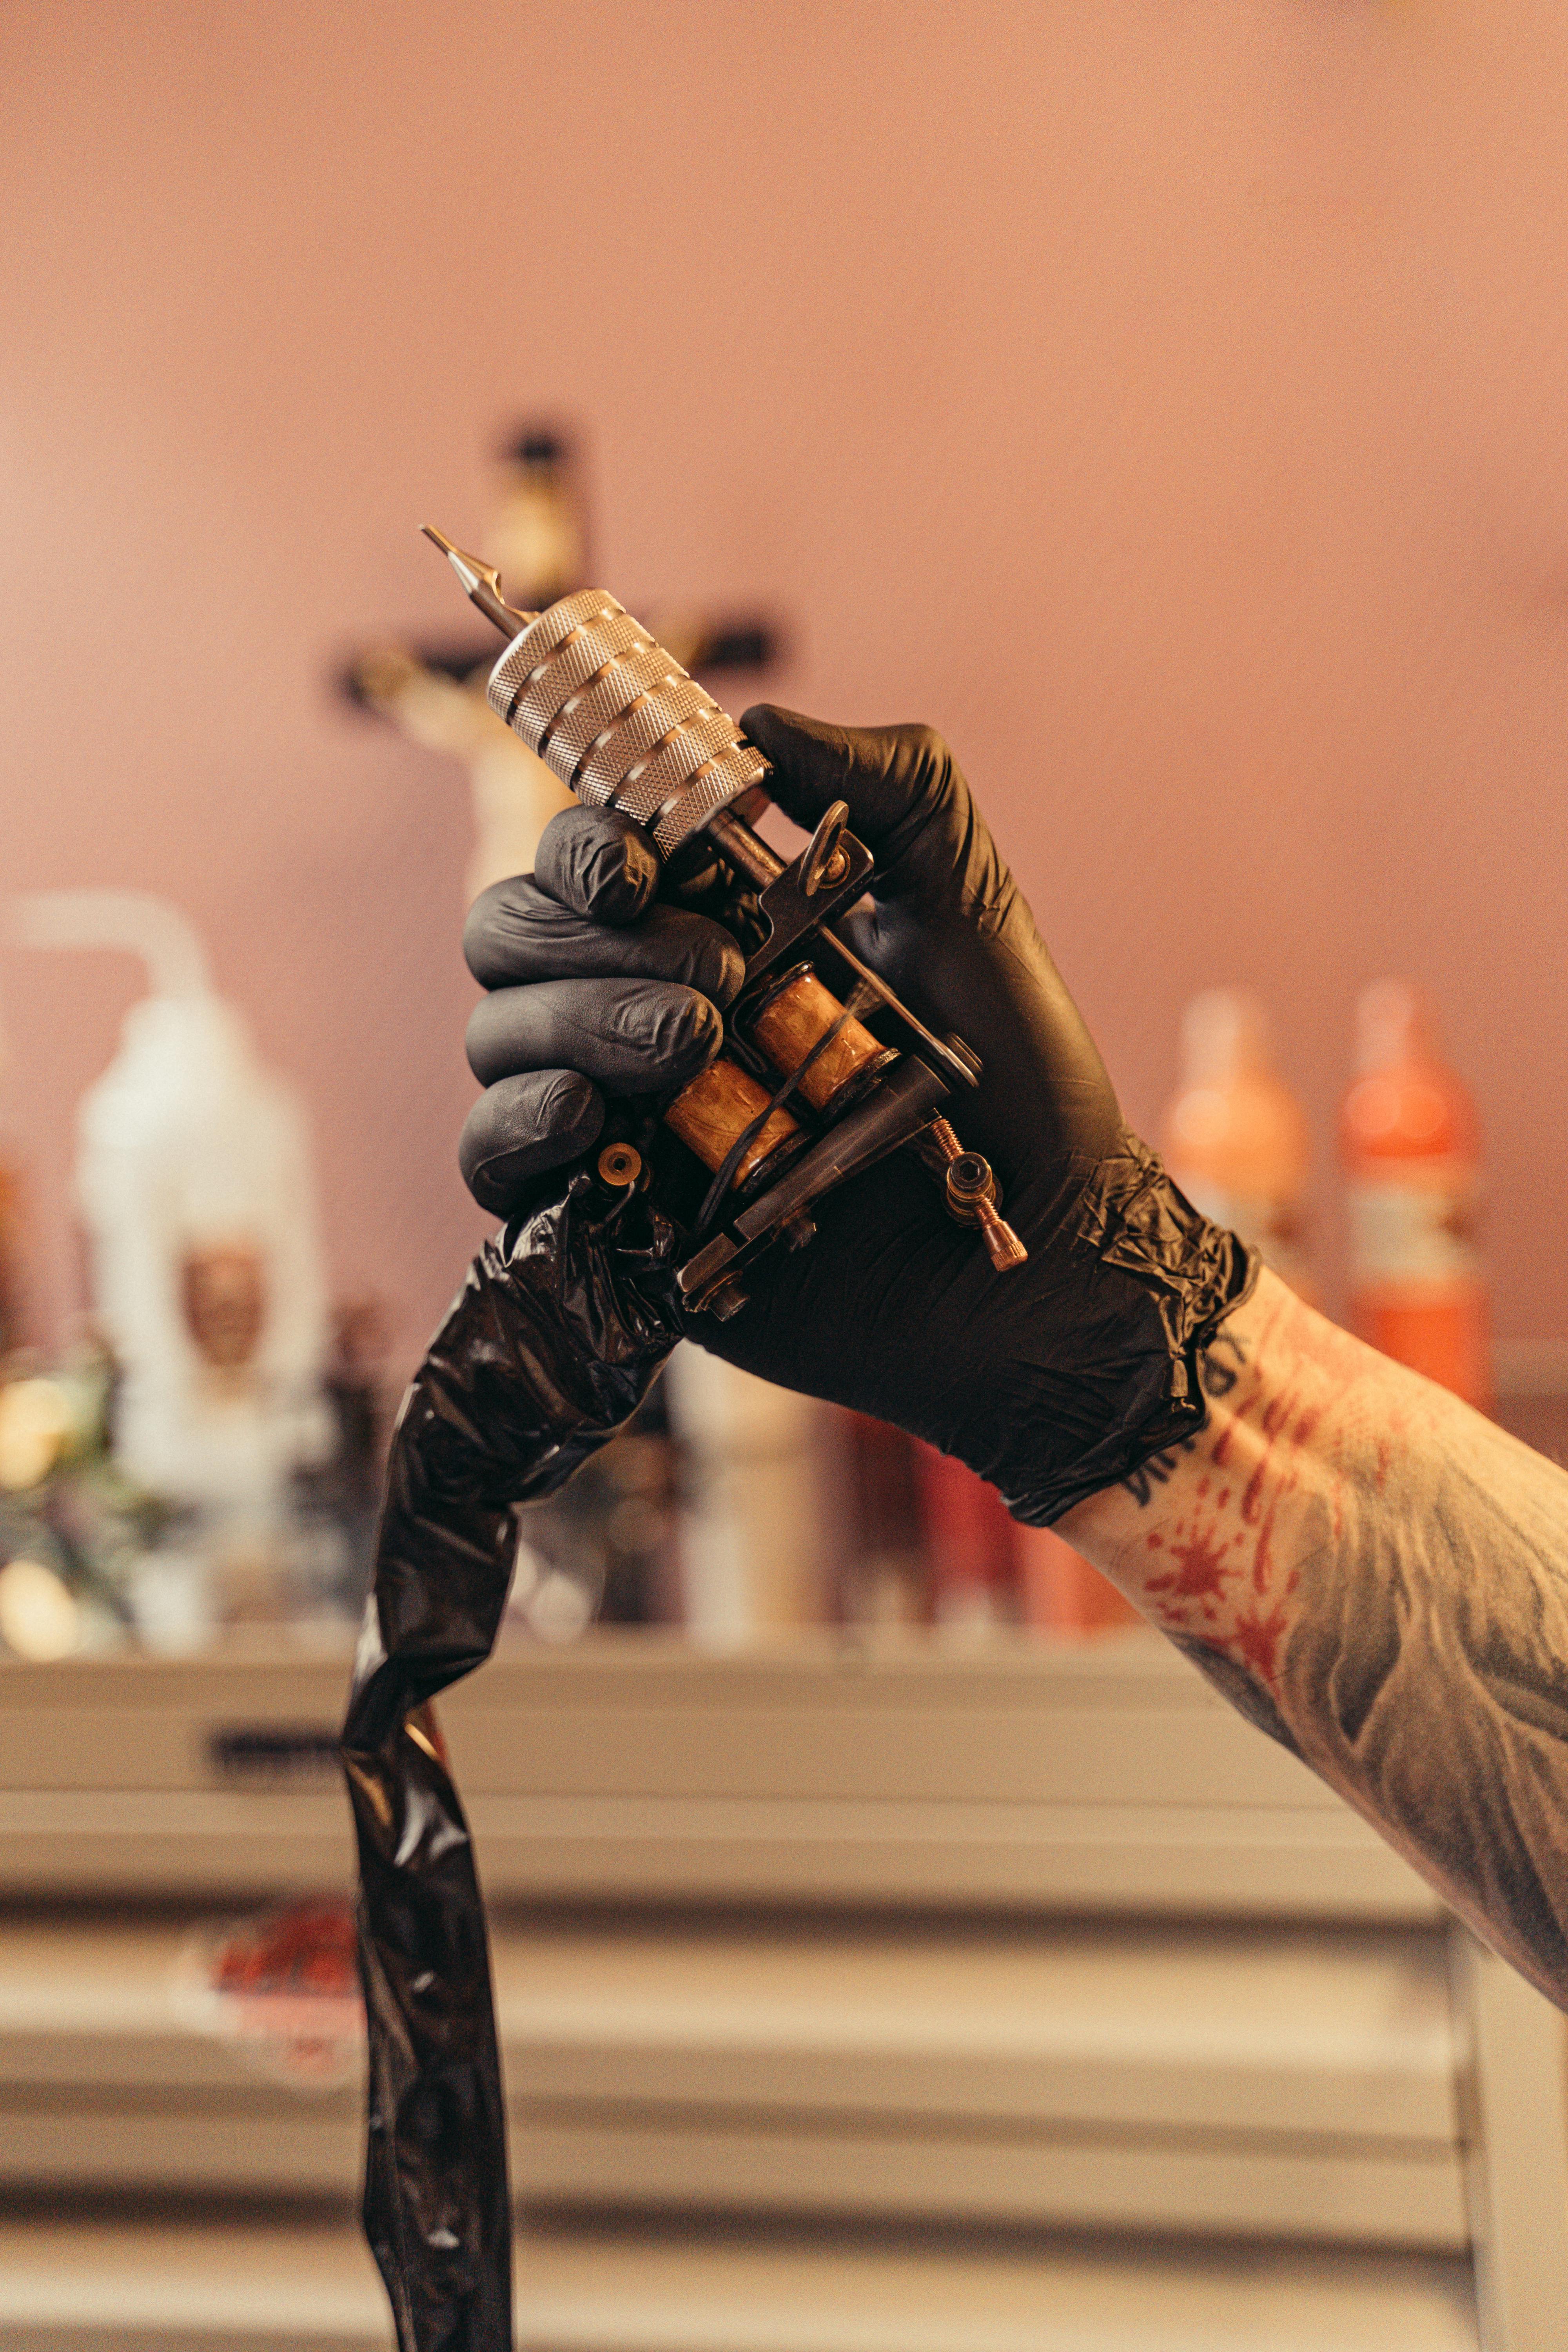 Battery Powered Tattoo Machines Are Here To Stay  The Mad Tatter